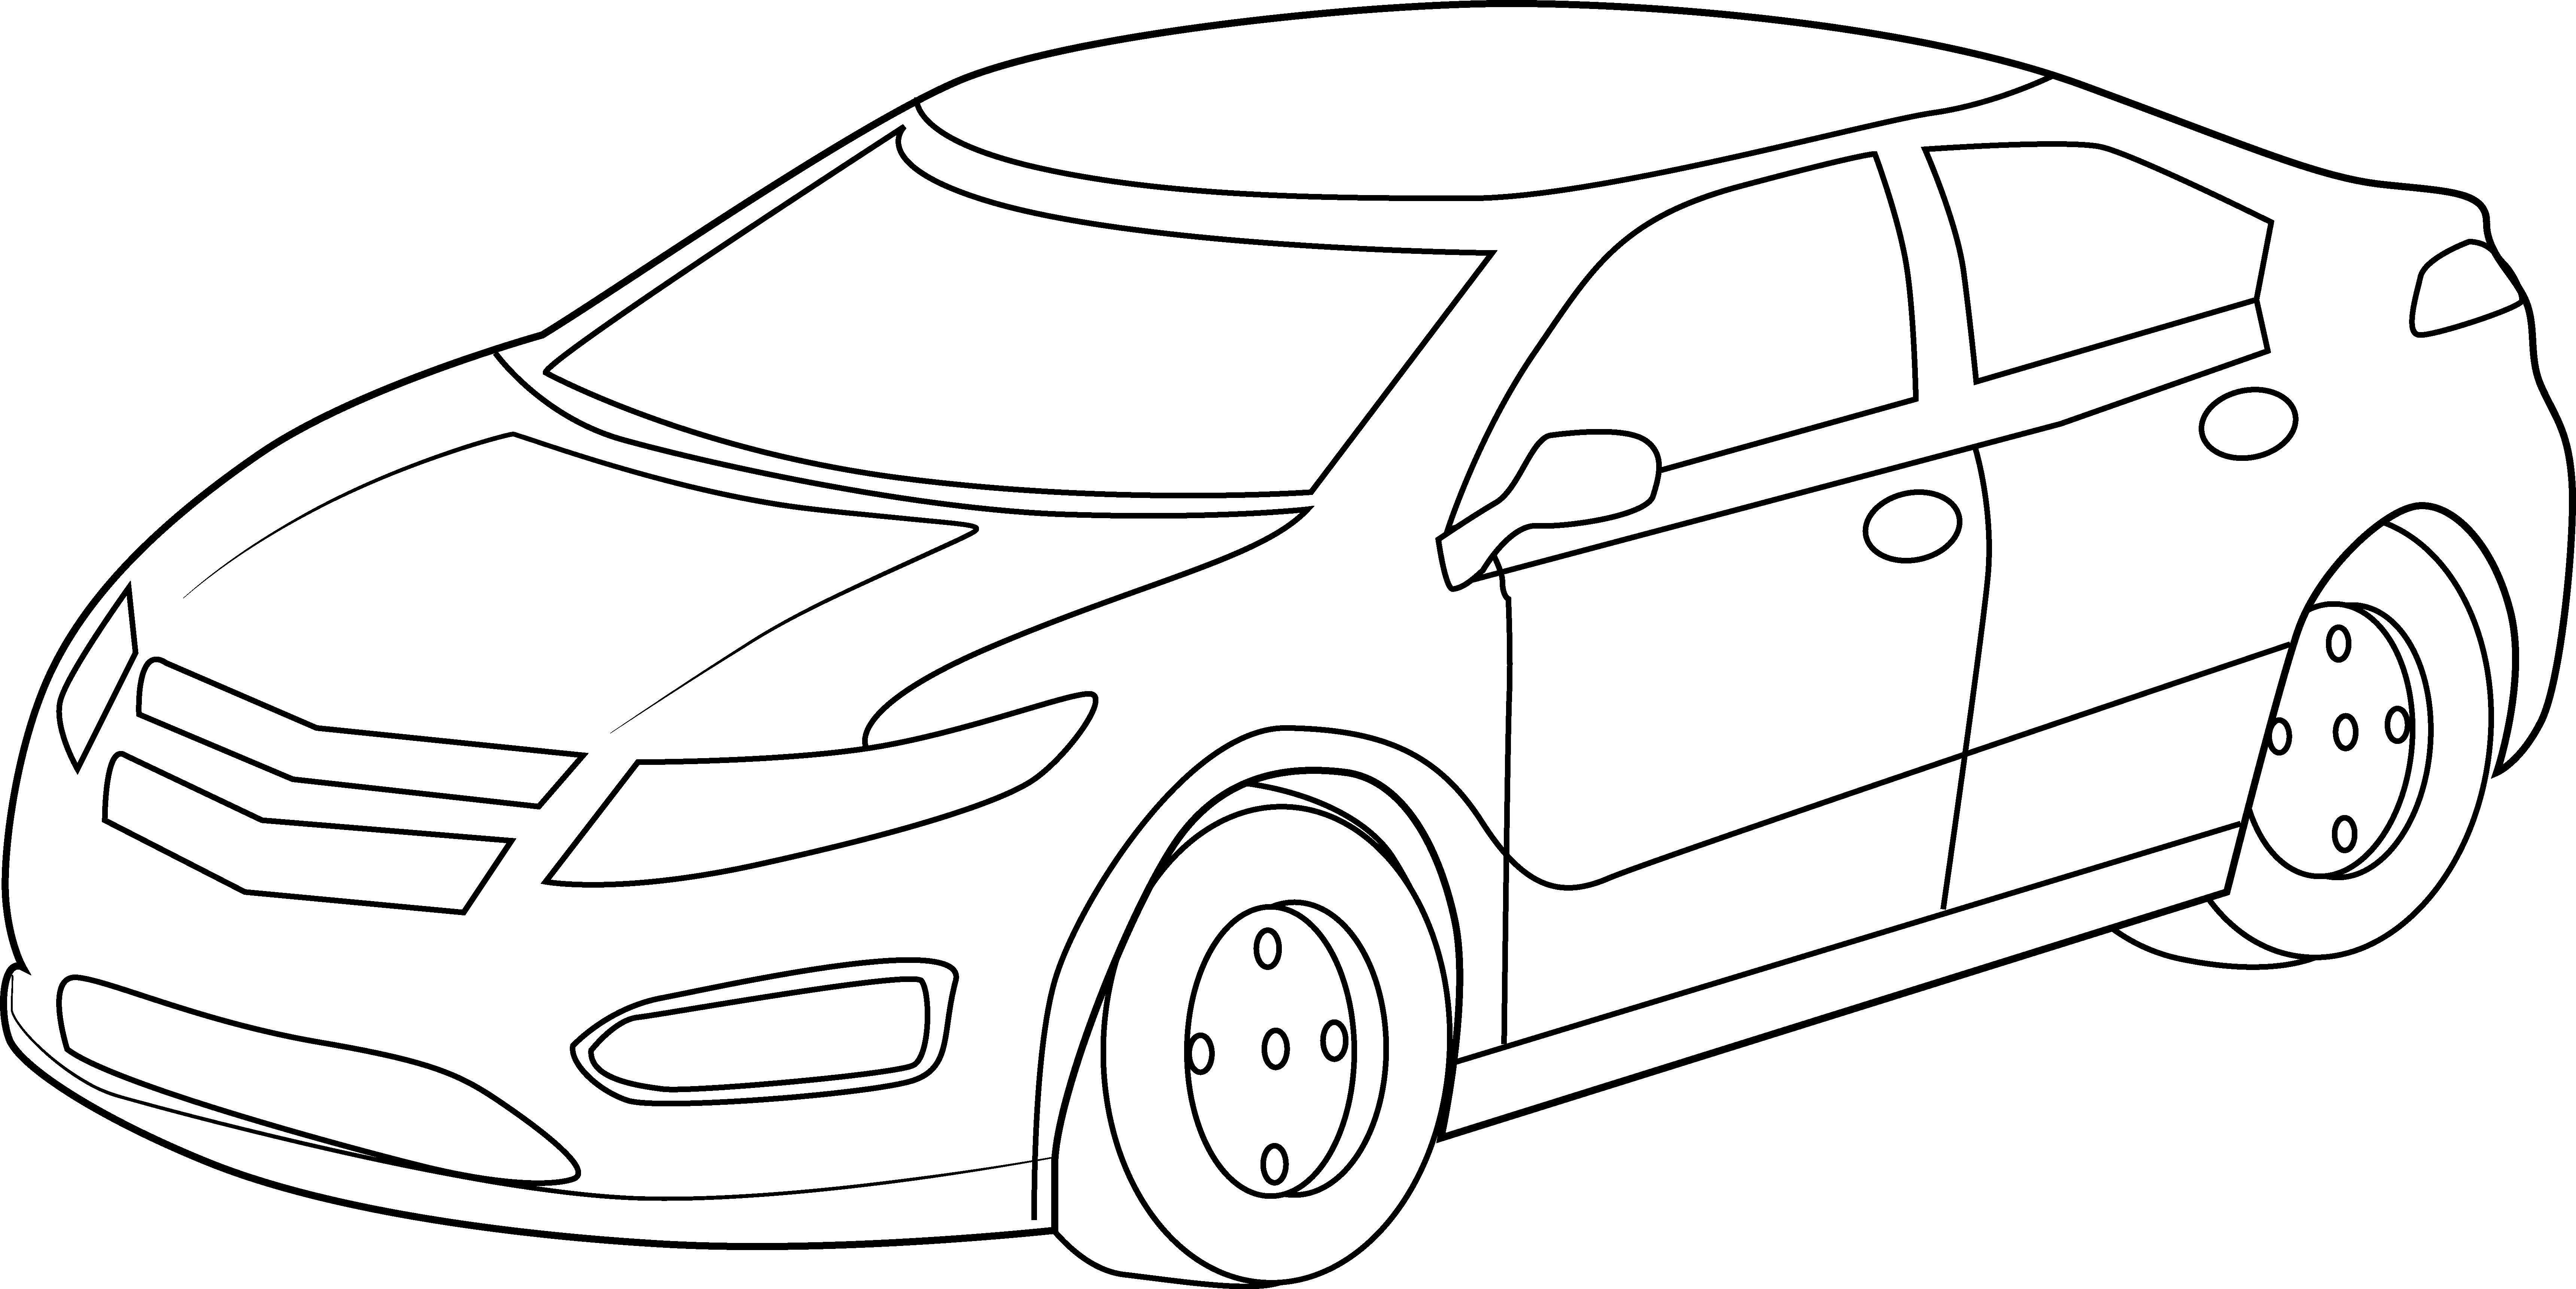 Assembly line car clipart.